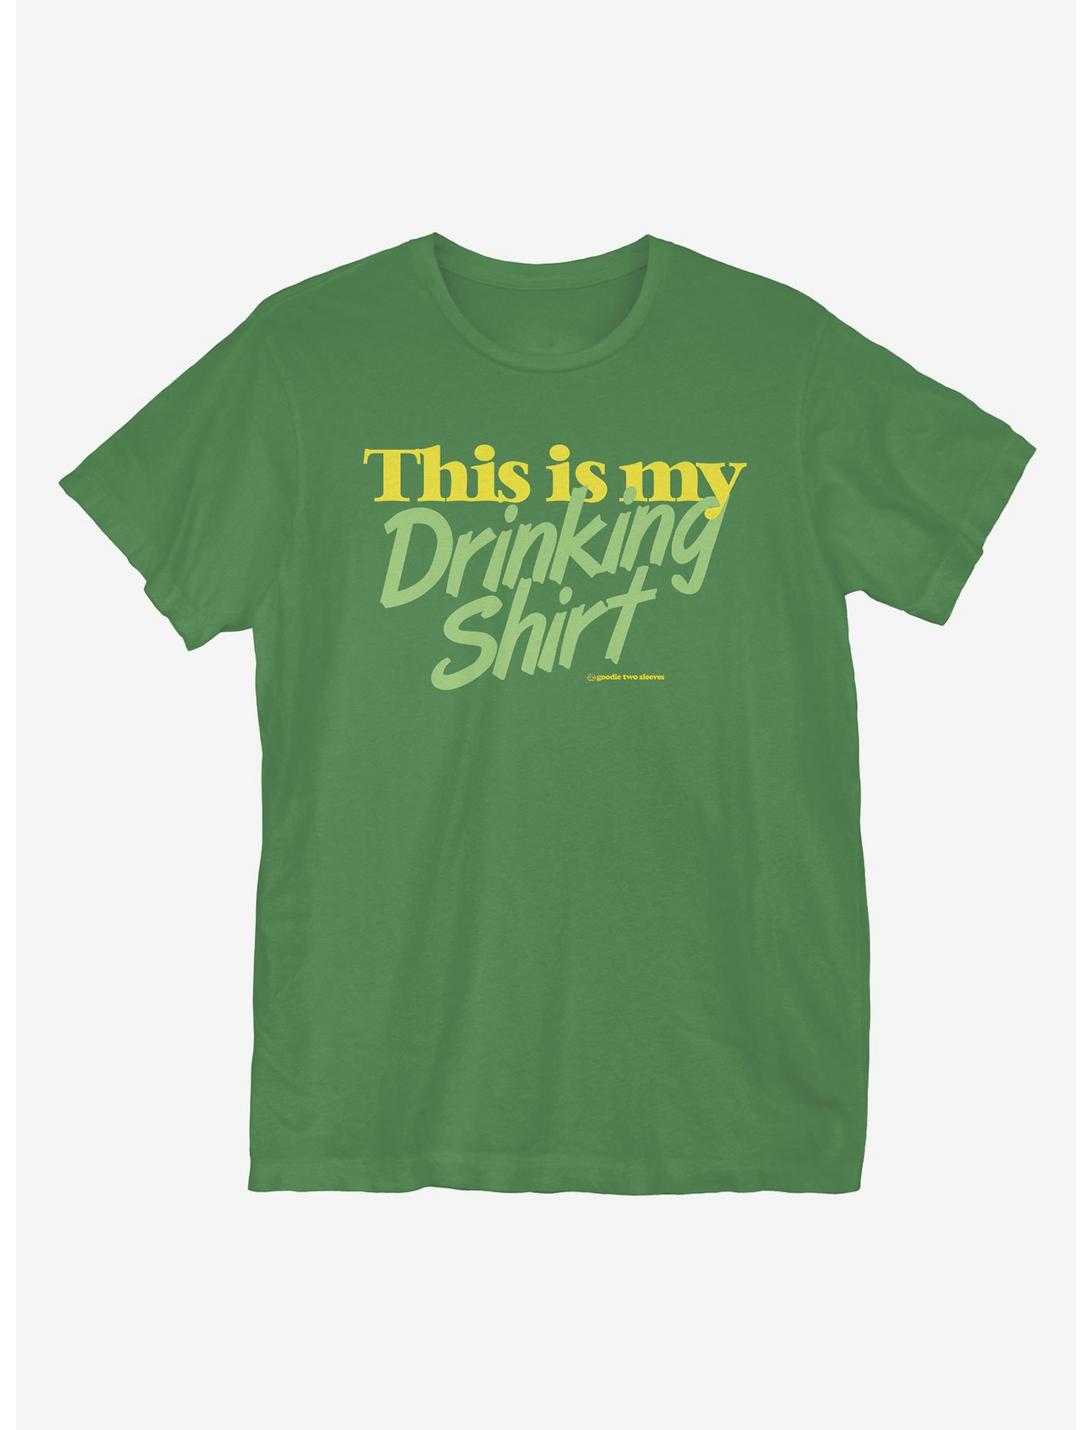 This Is My Drinking Shirt T-Shirt, KELLY GREEN, hi-res